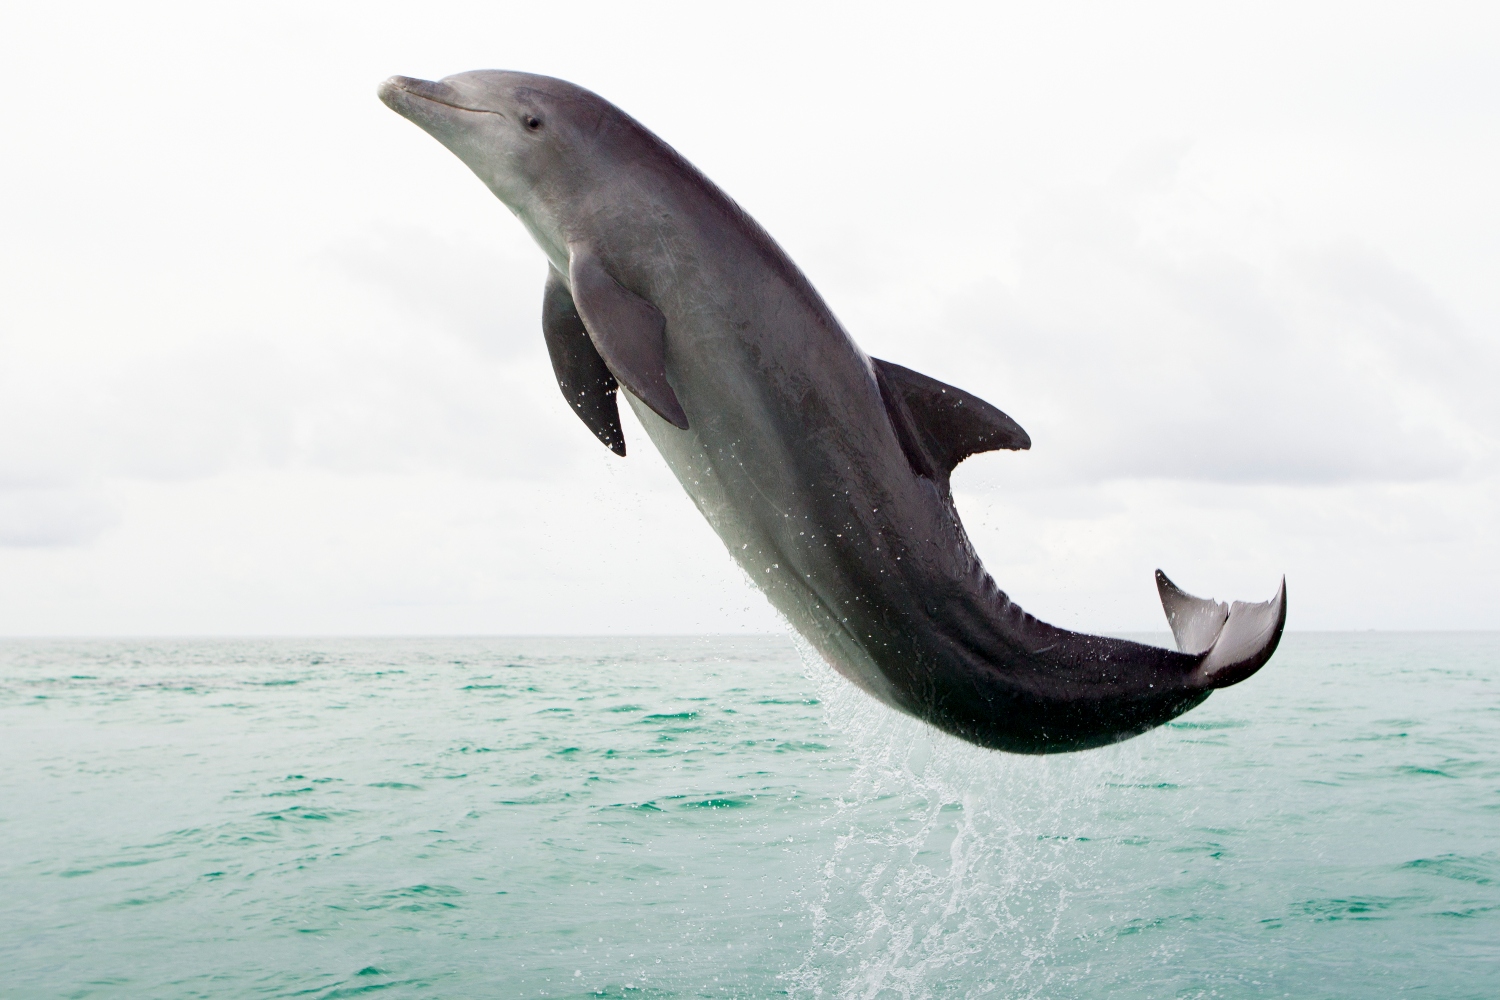 Dolphin leaping in open ocean. Last summer, researchers observed a case where dolphins were swimming around and playing with an anaconda, normally a snake animals don't mess with.